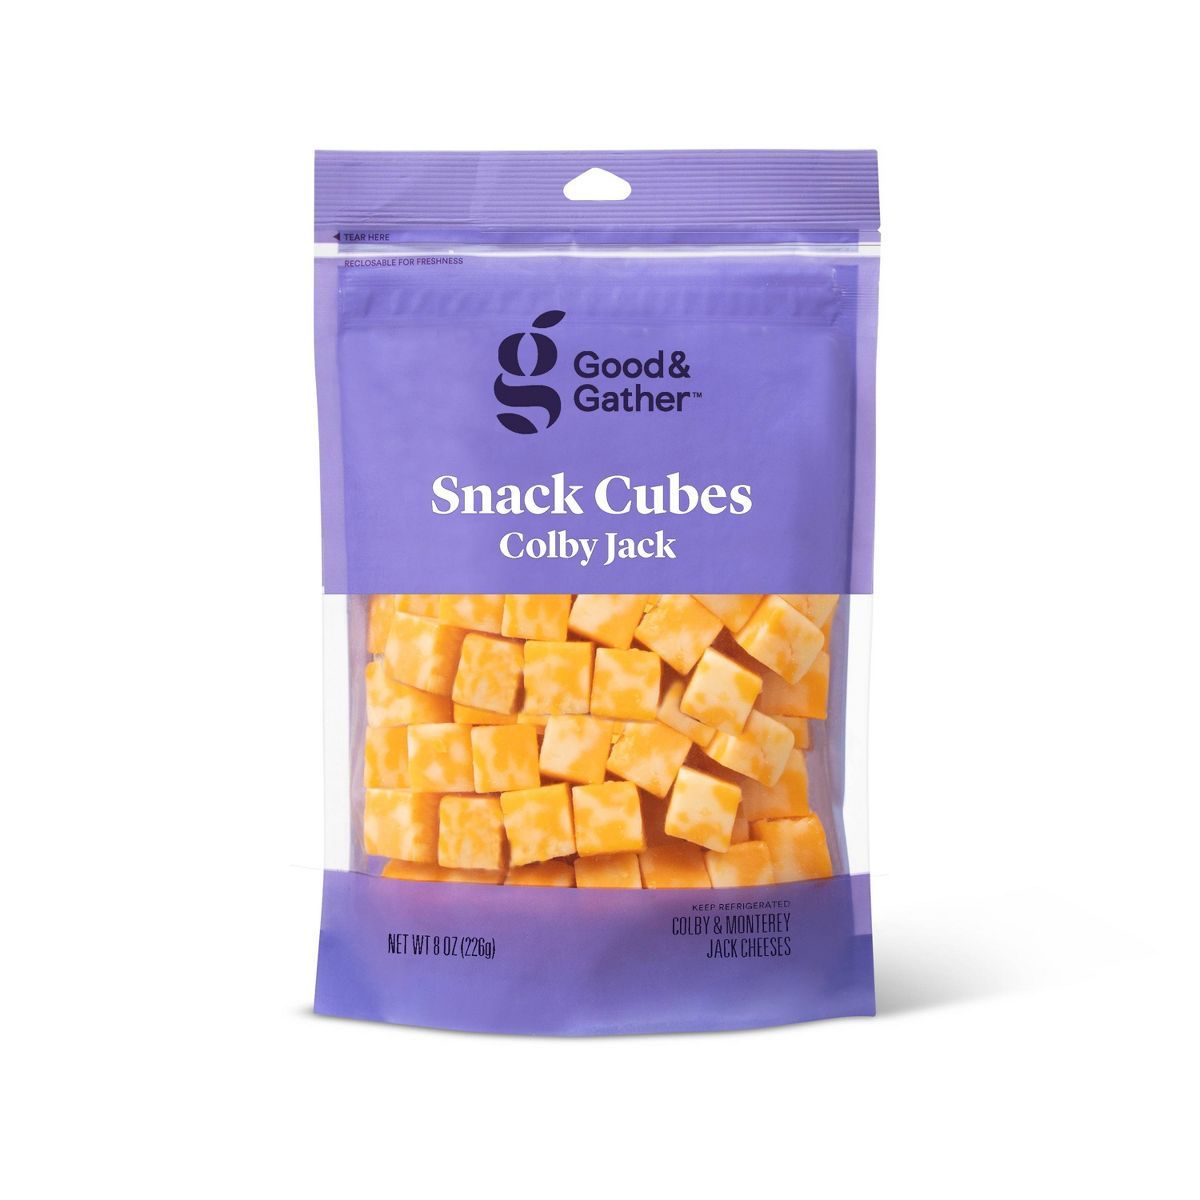 Colby Jack Cheese Cubes - 8oz - Good & Gather™ | Target